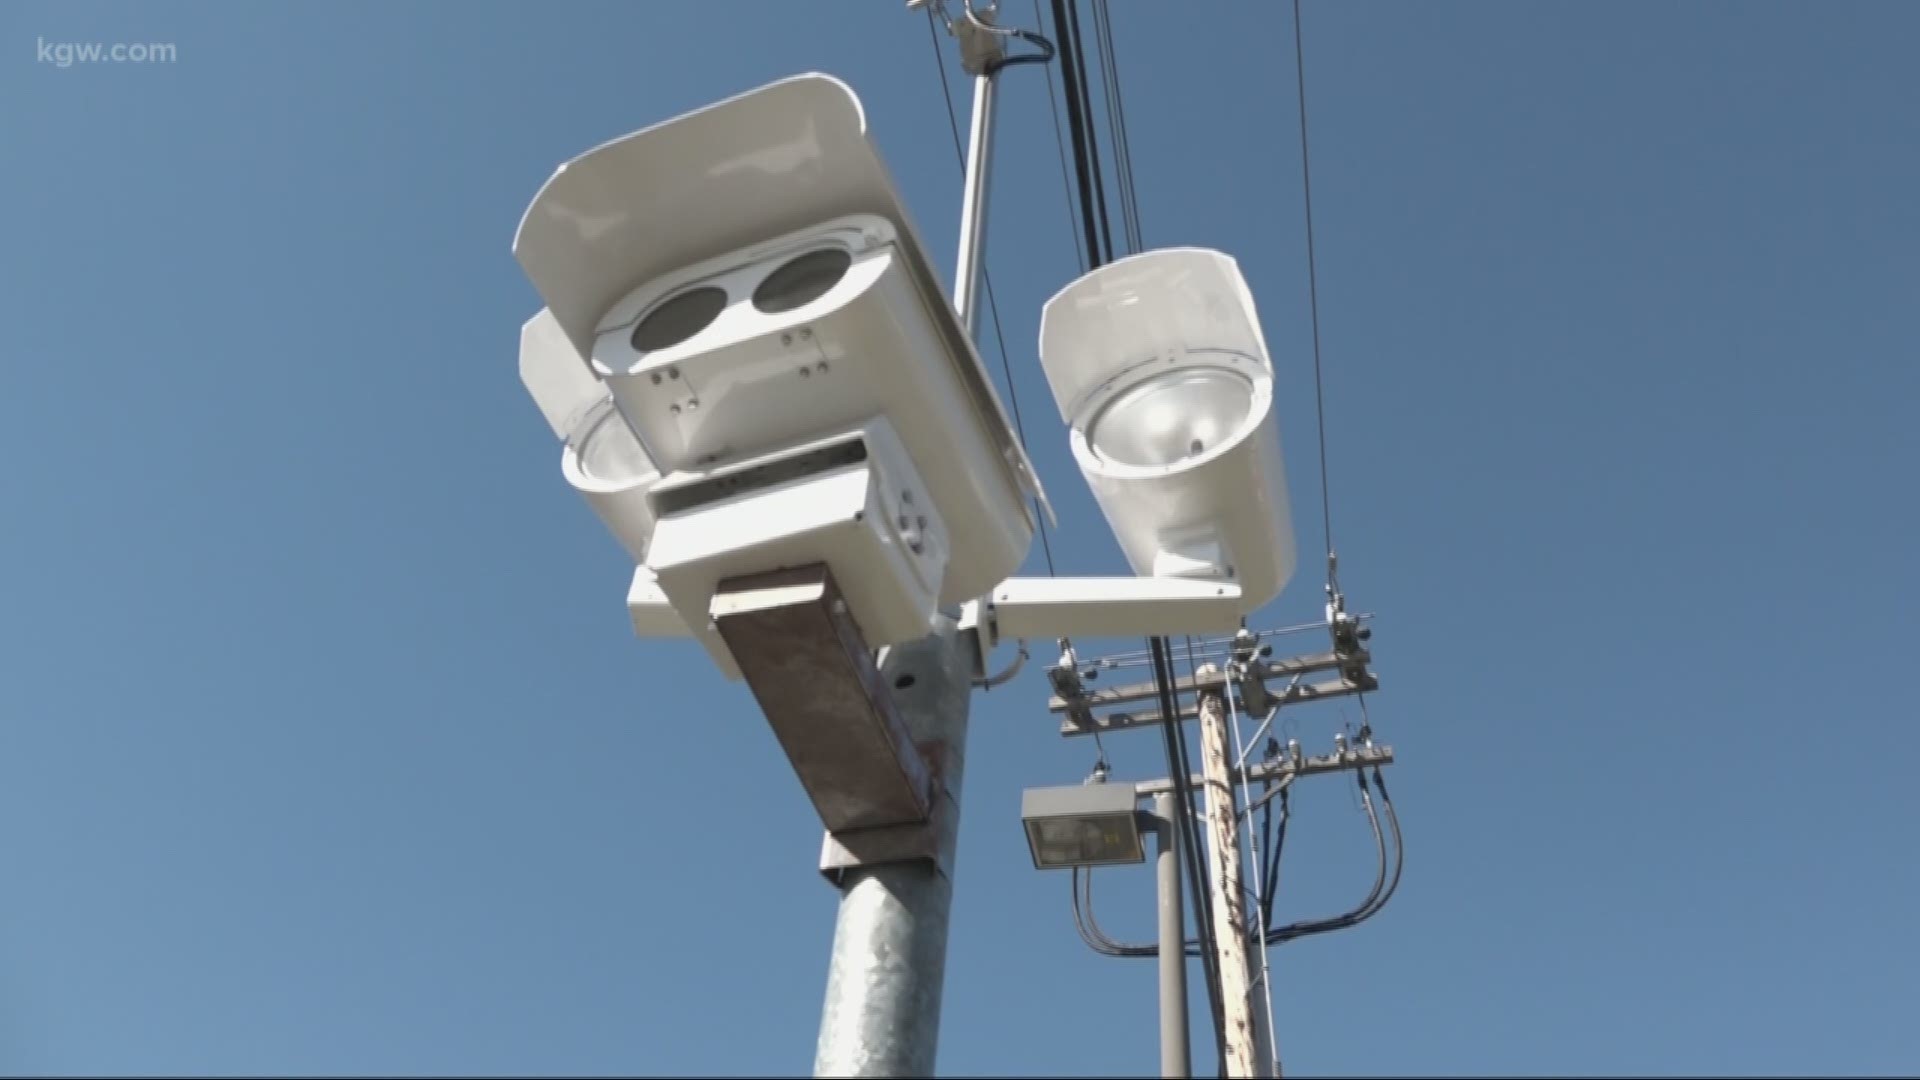 Red-light cameras are catching speeding drivers in Beaverton.